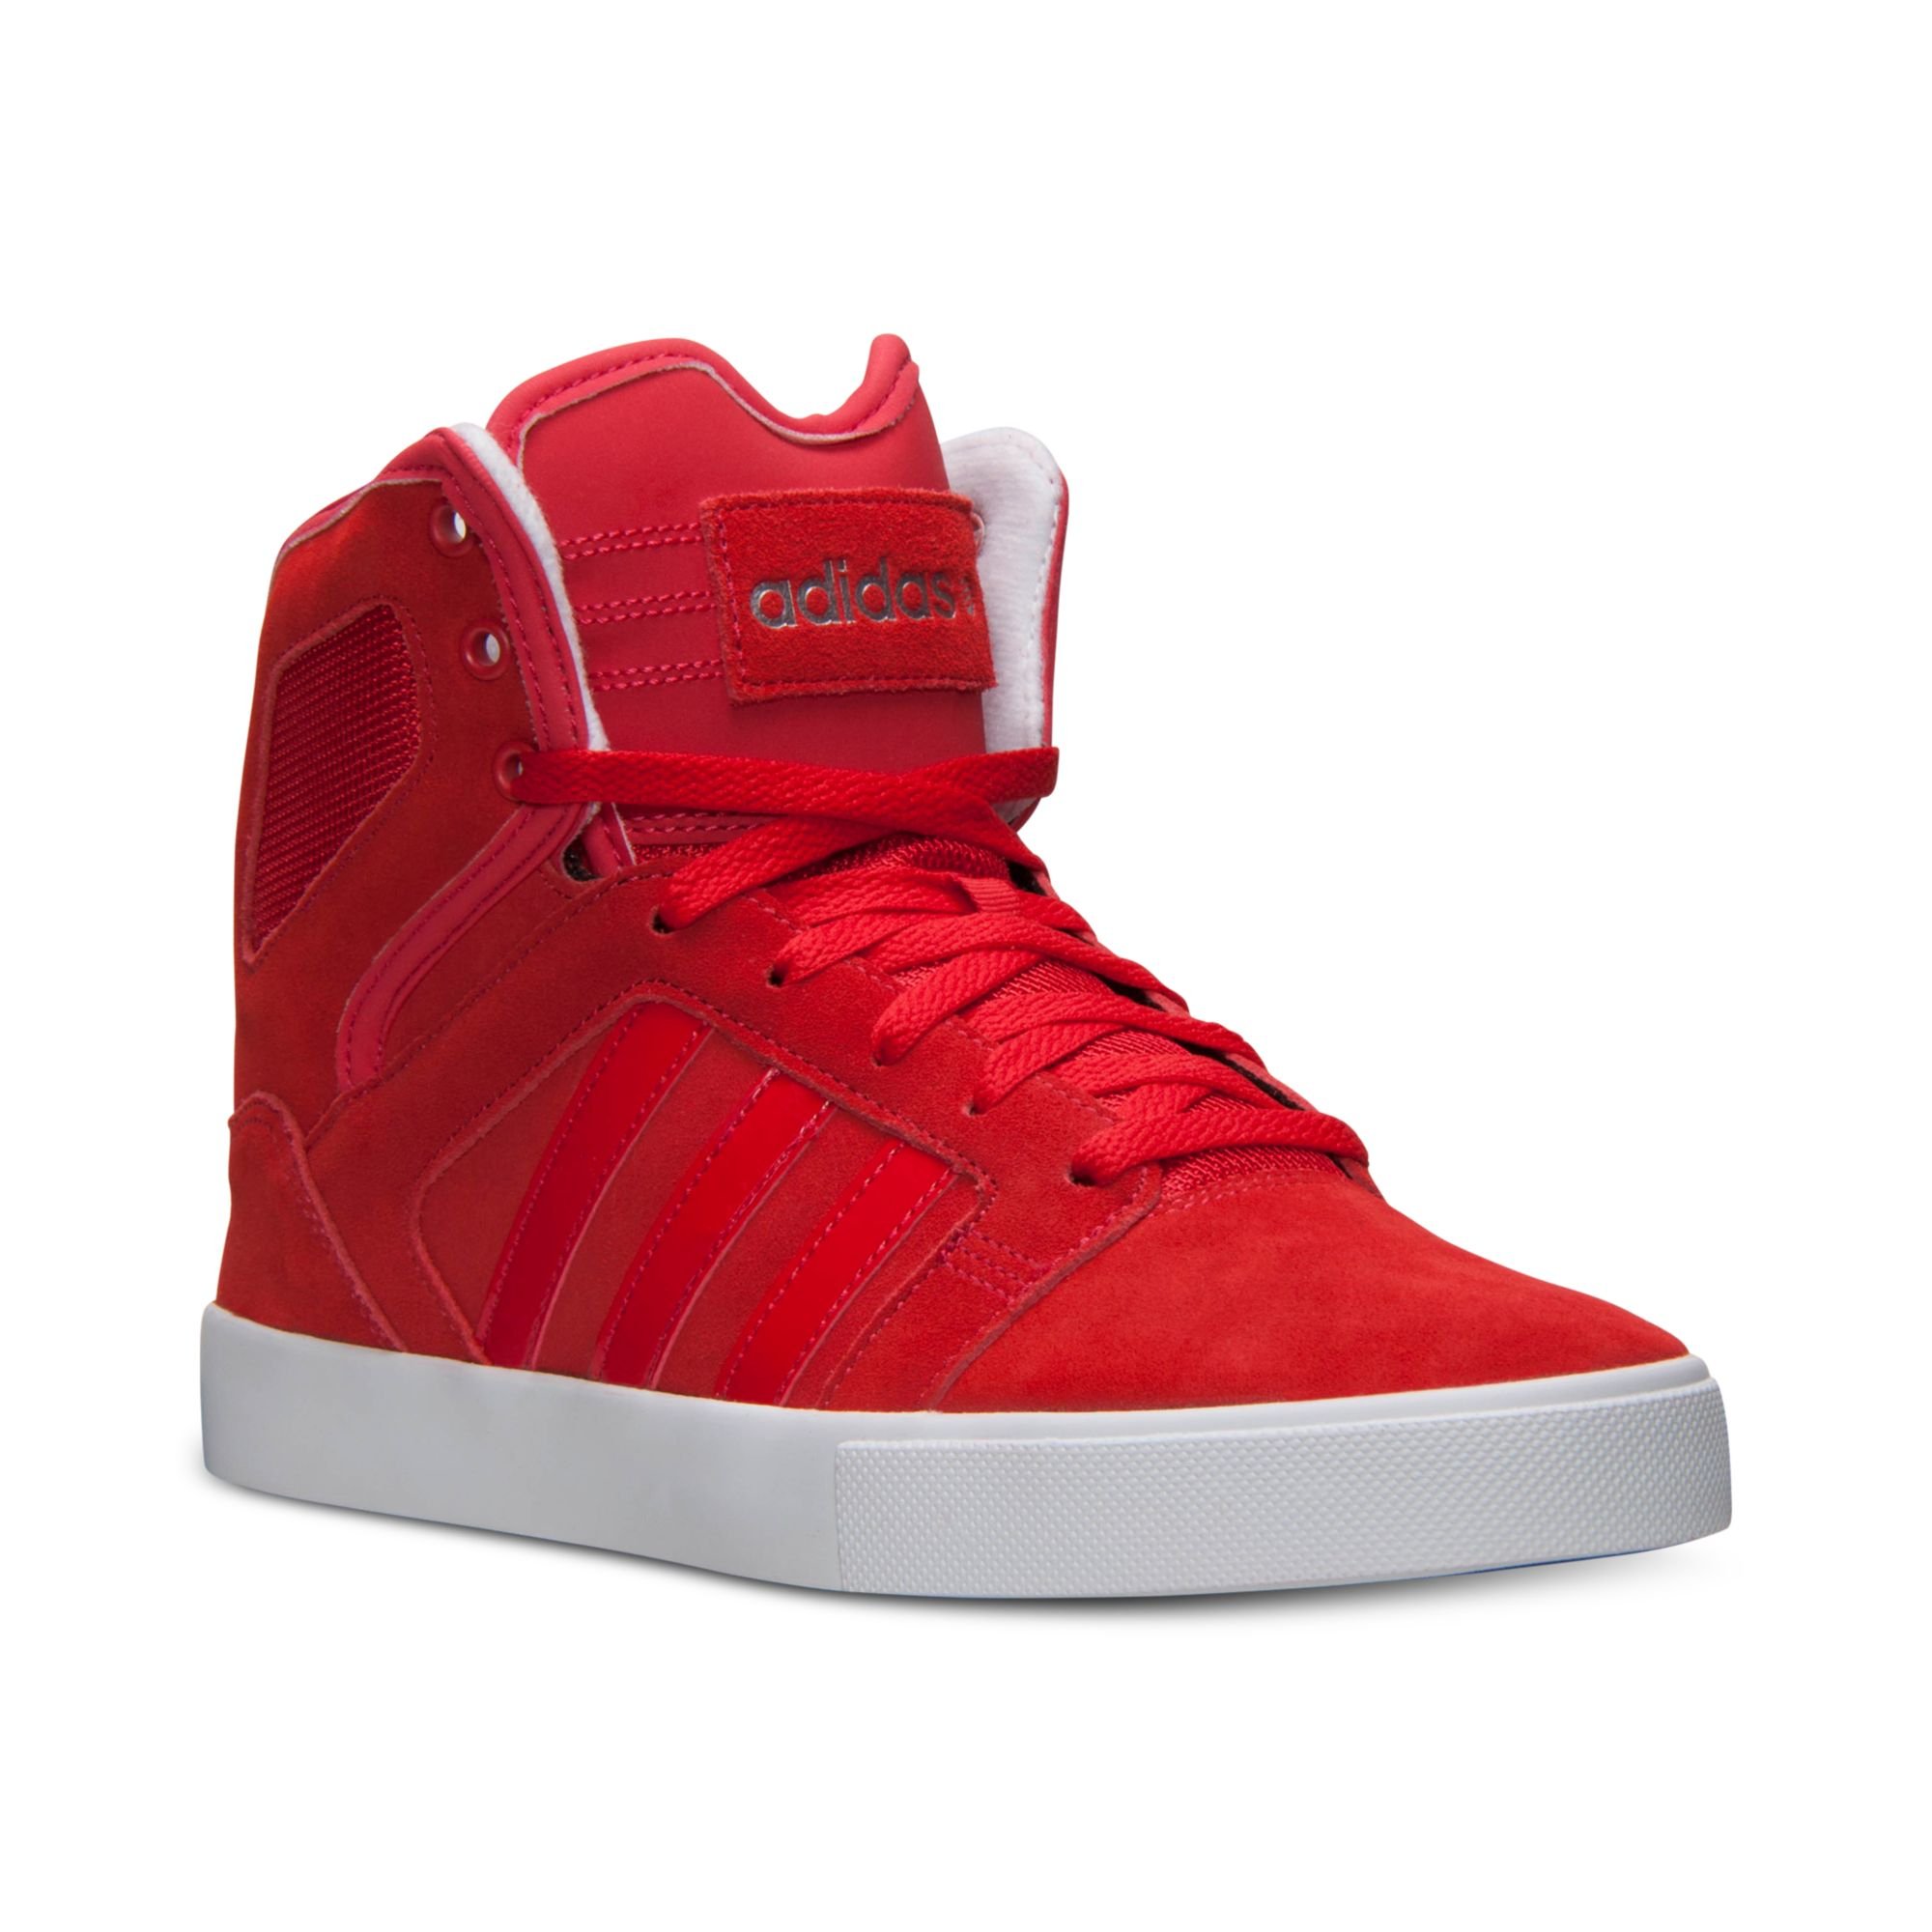 Lyst - Adidas Men's Bbneo Hi-top Casual Sneakers From Finish Line in